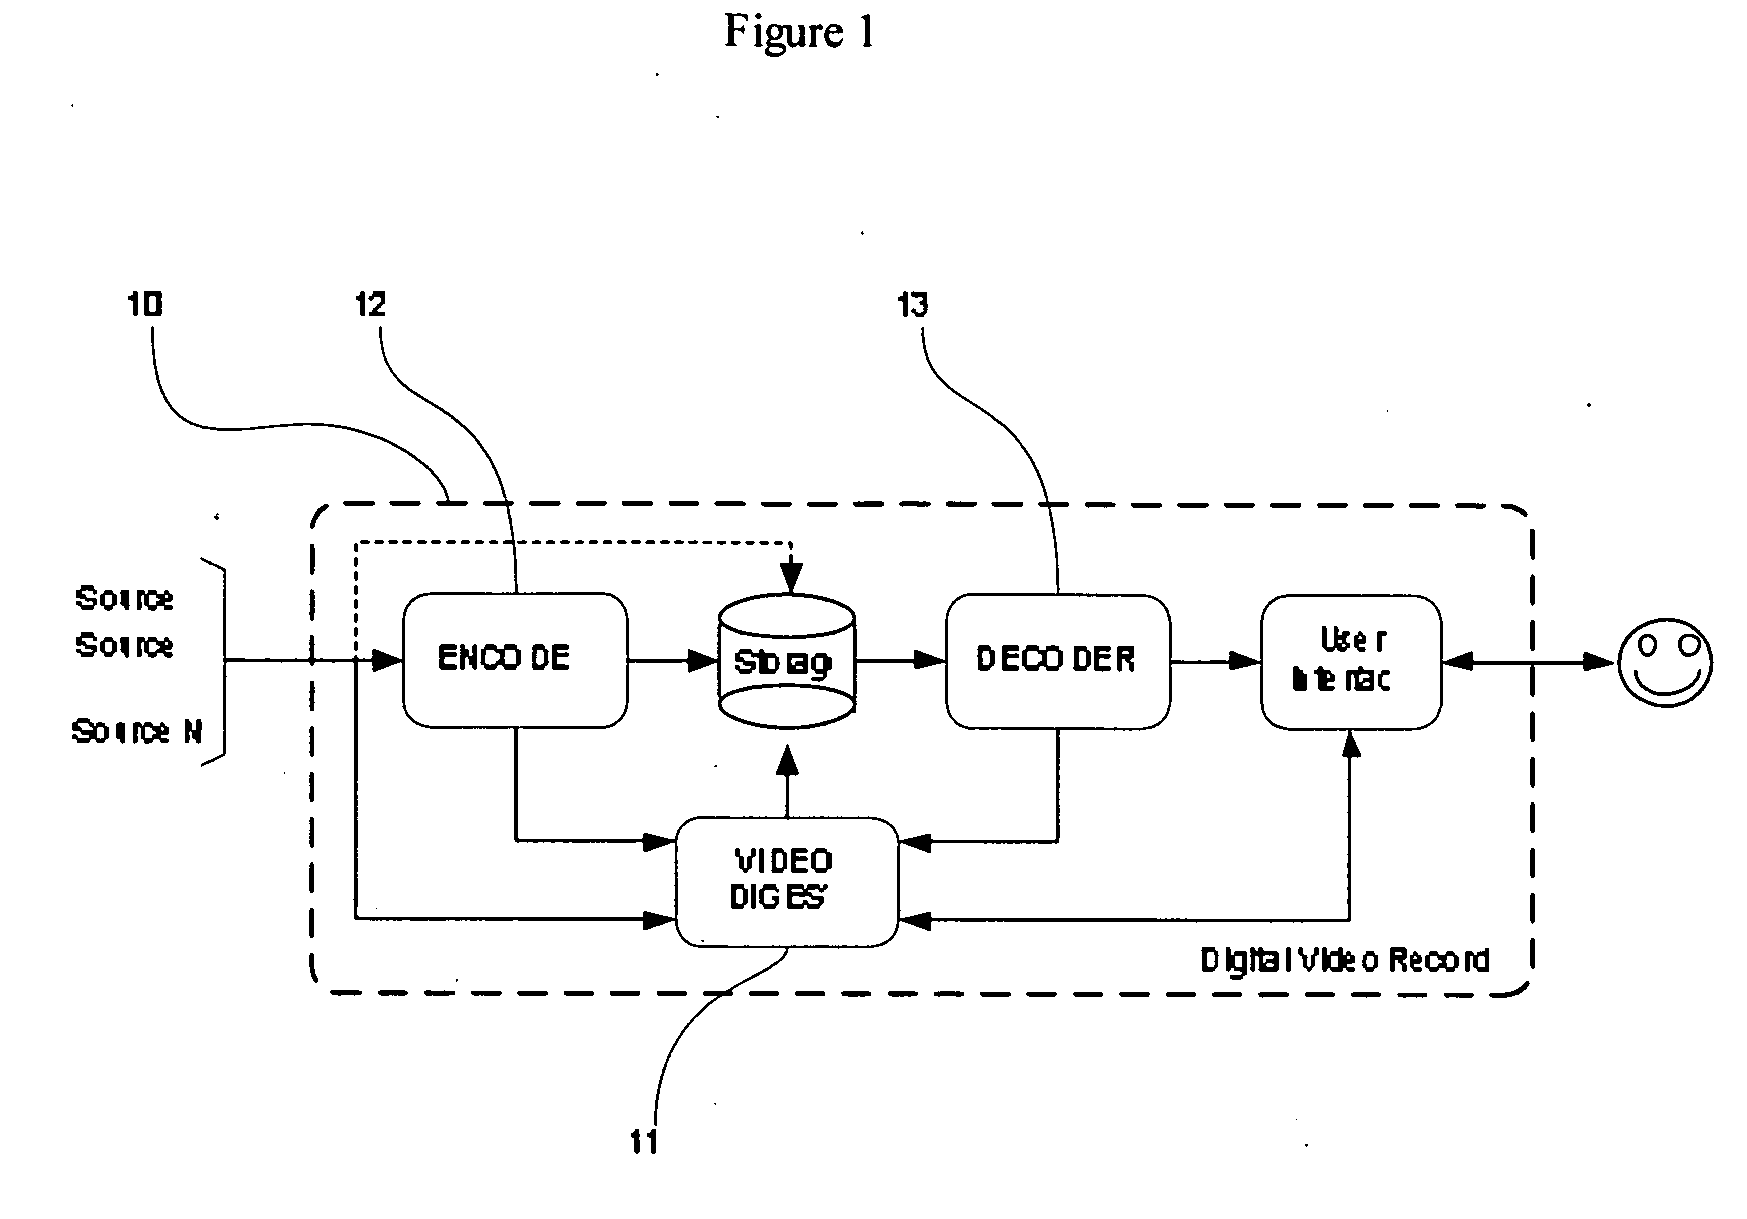 Method and Apparatus for Video Digest Generation